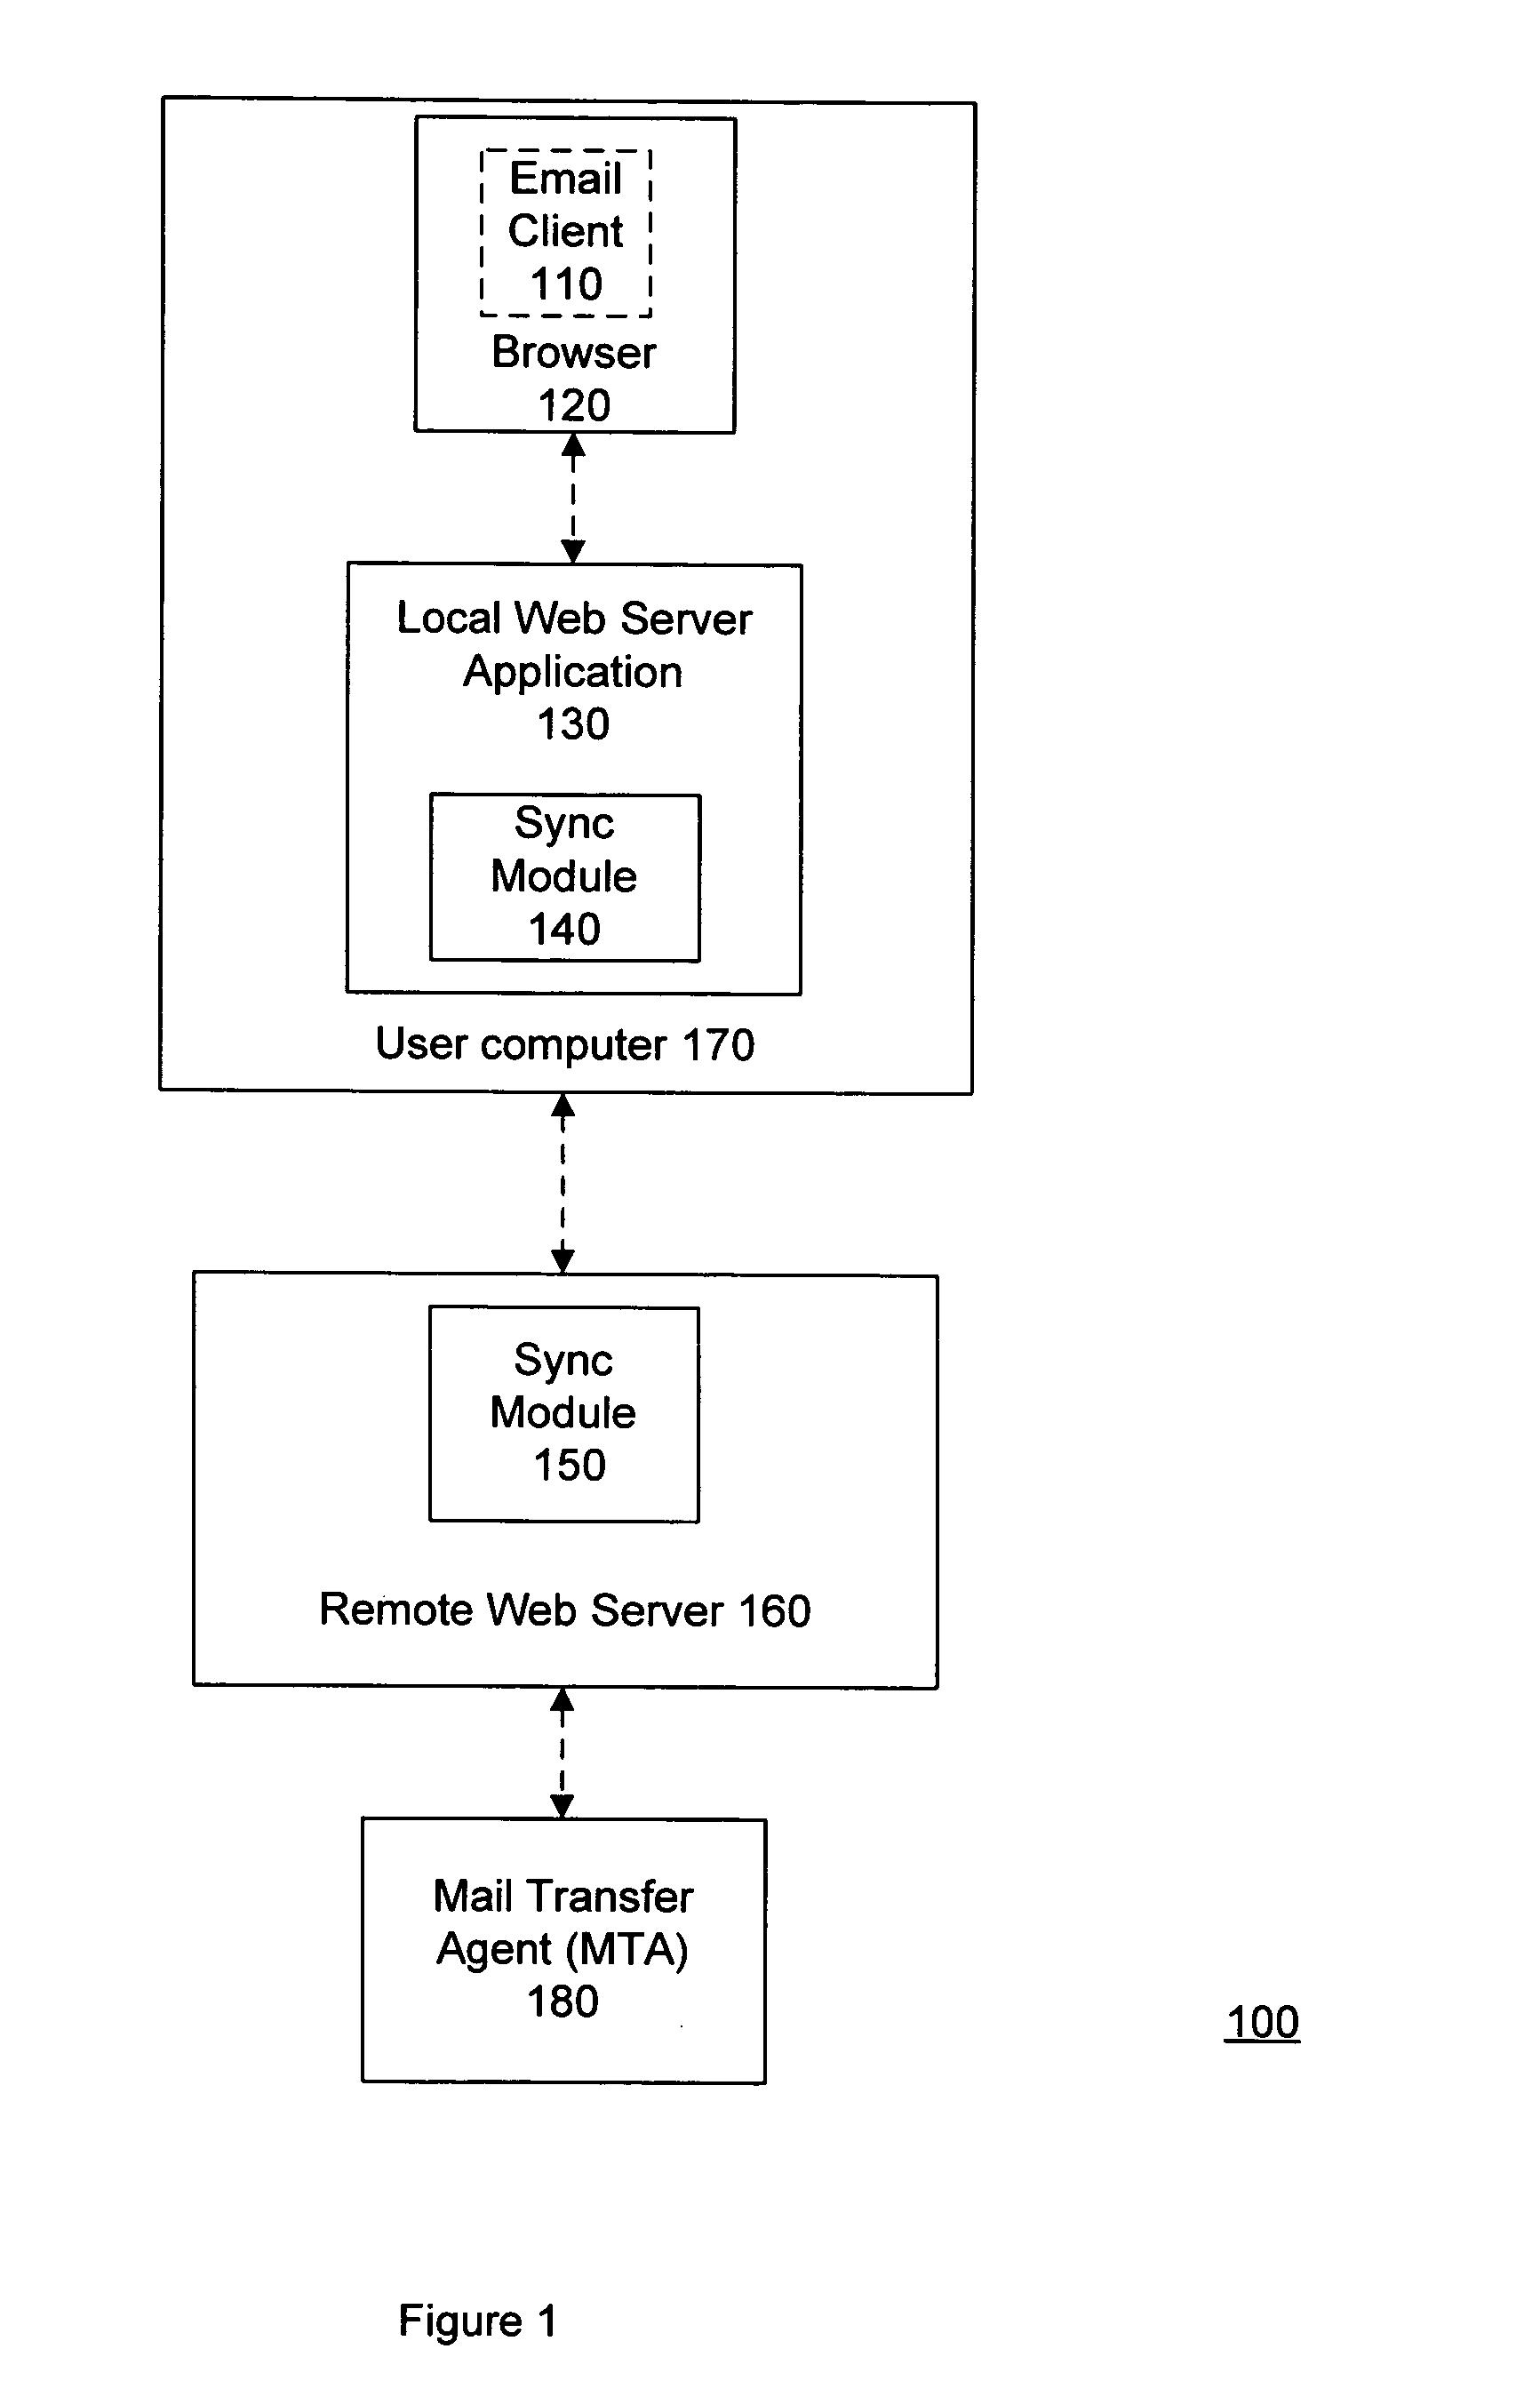 System and method for enabling offline use of email through a browser interface